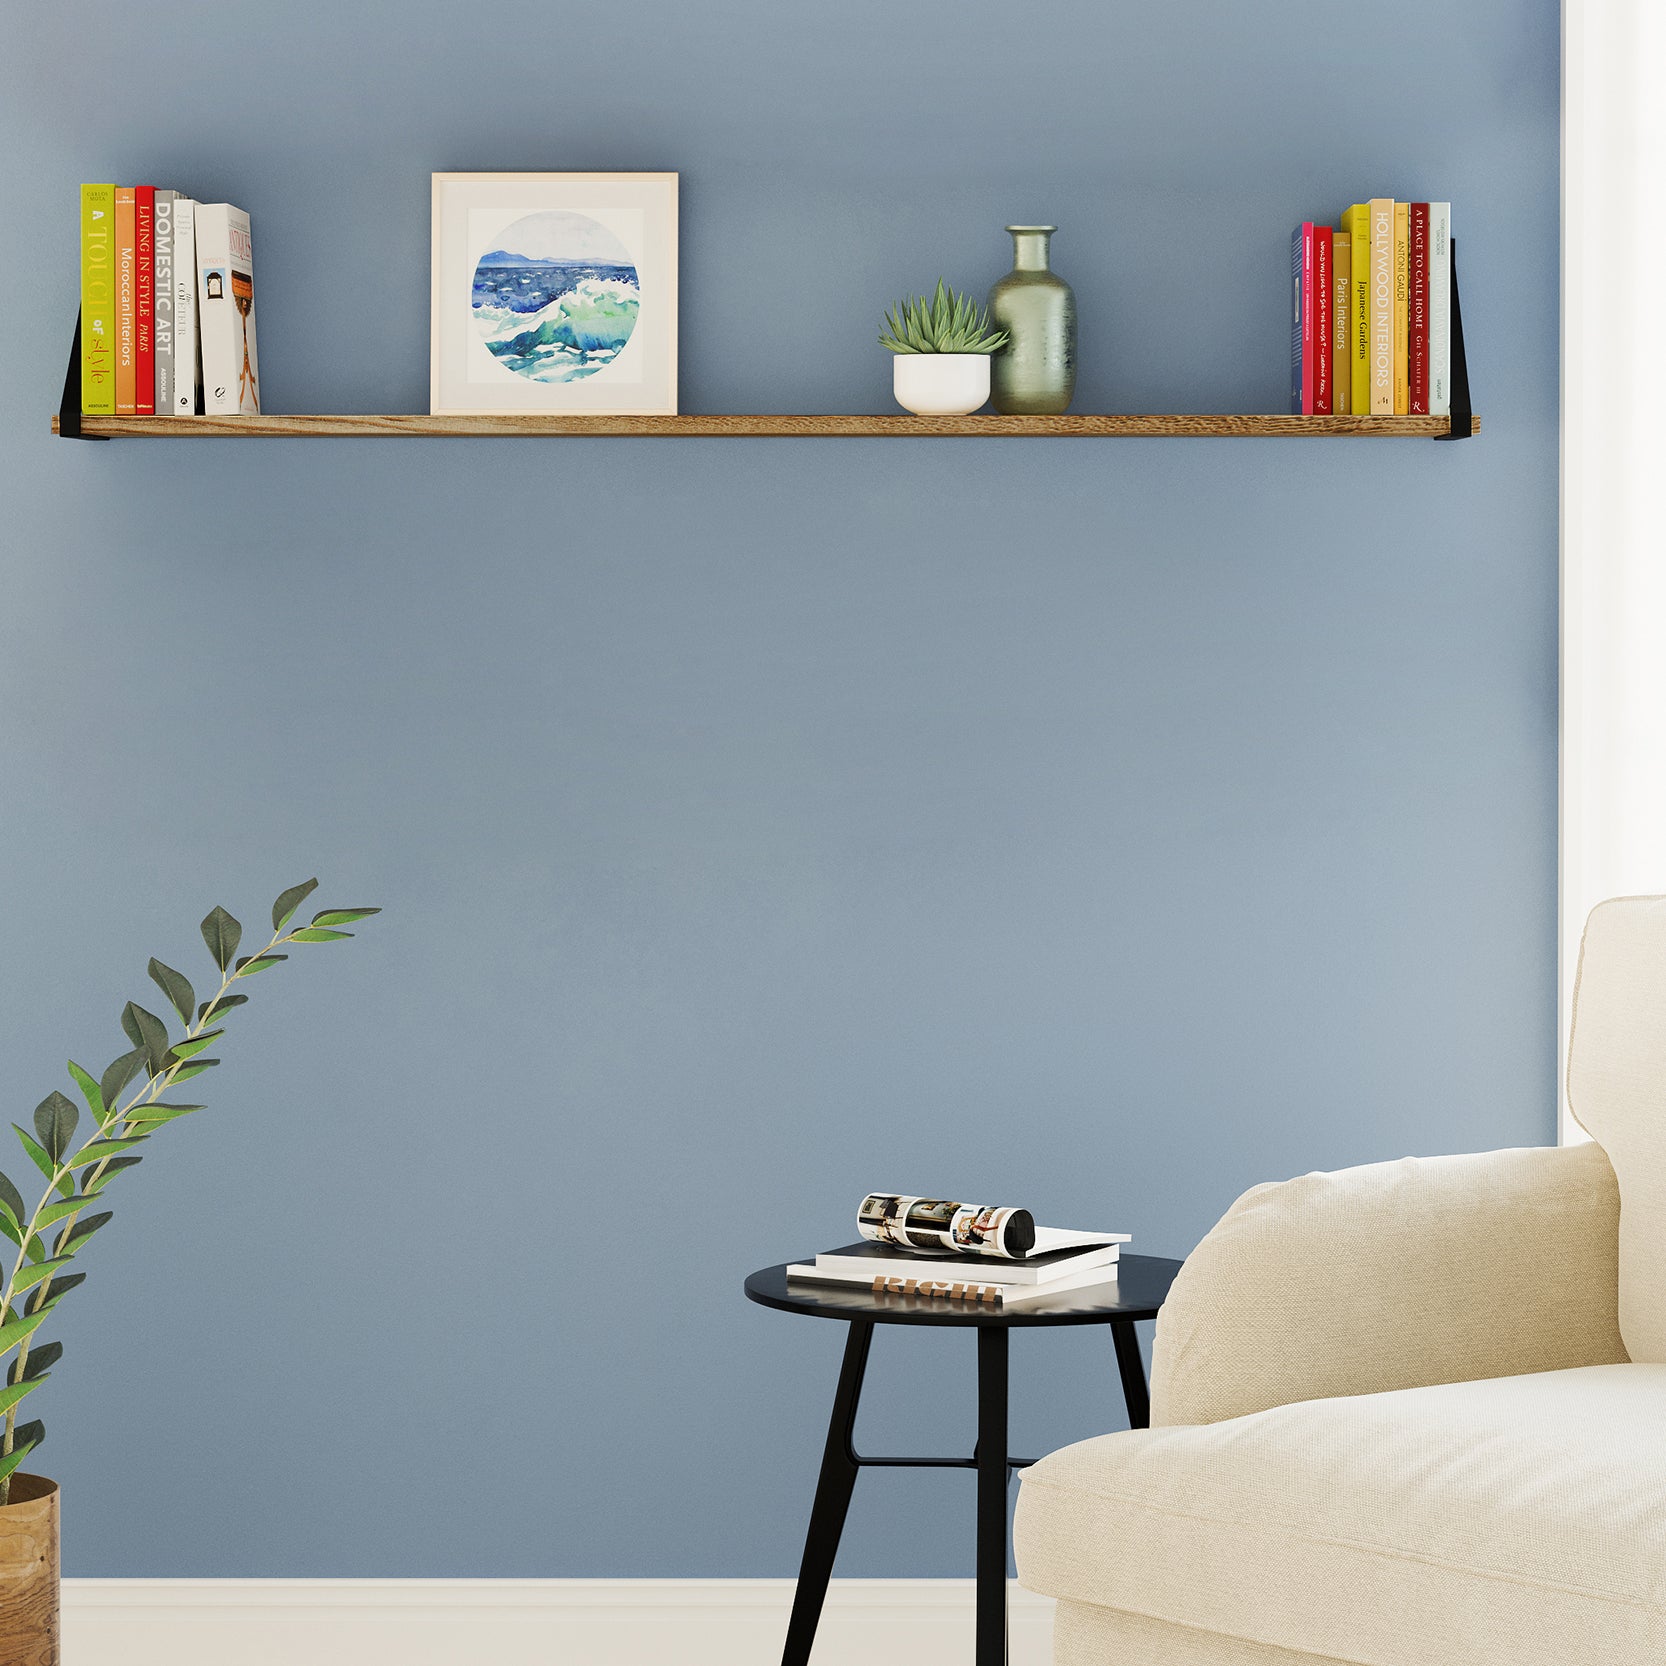 A simple reading corner setup with wall bookshelves above a table, displaying books and a small plant.